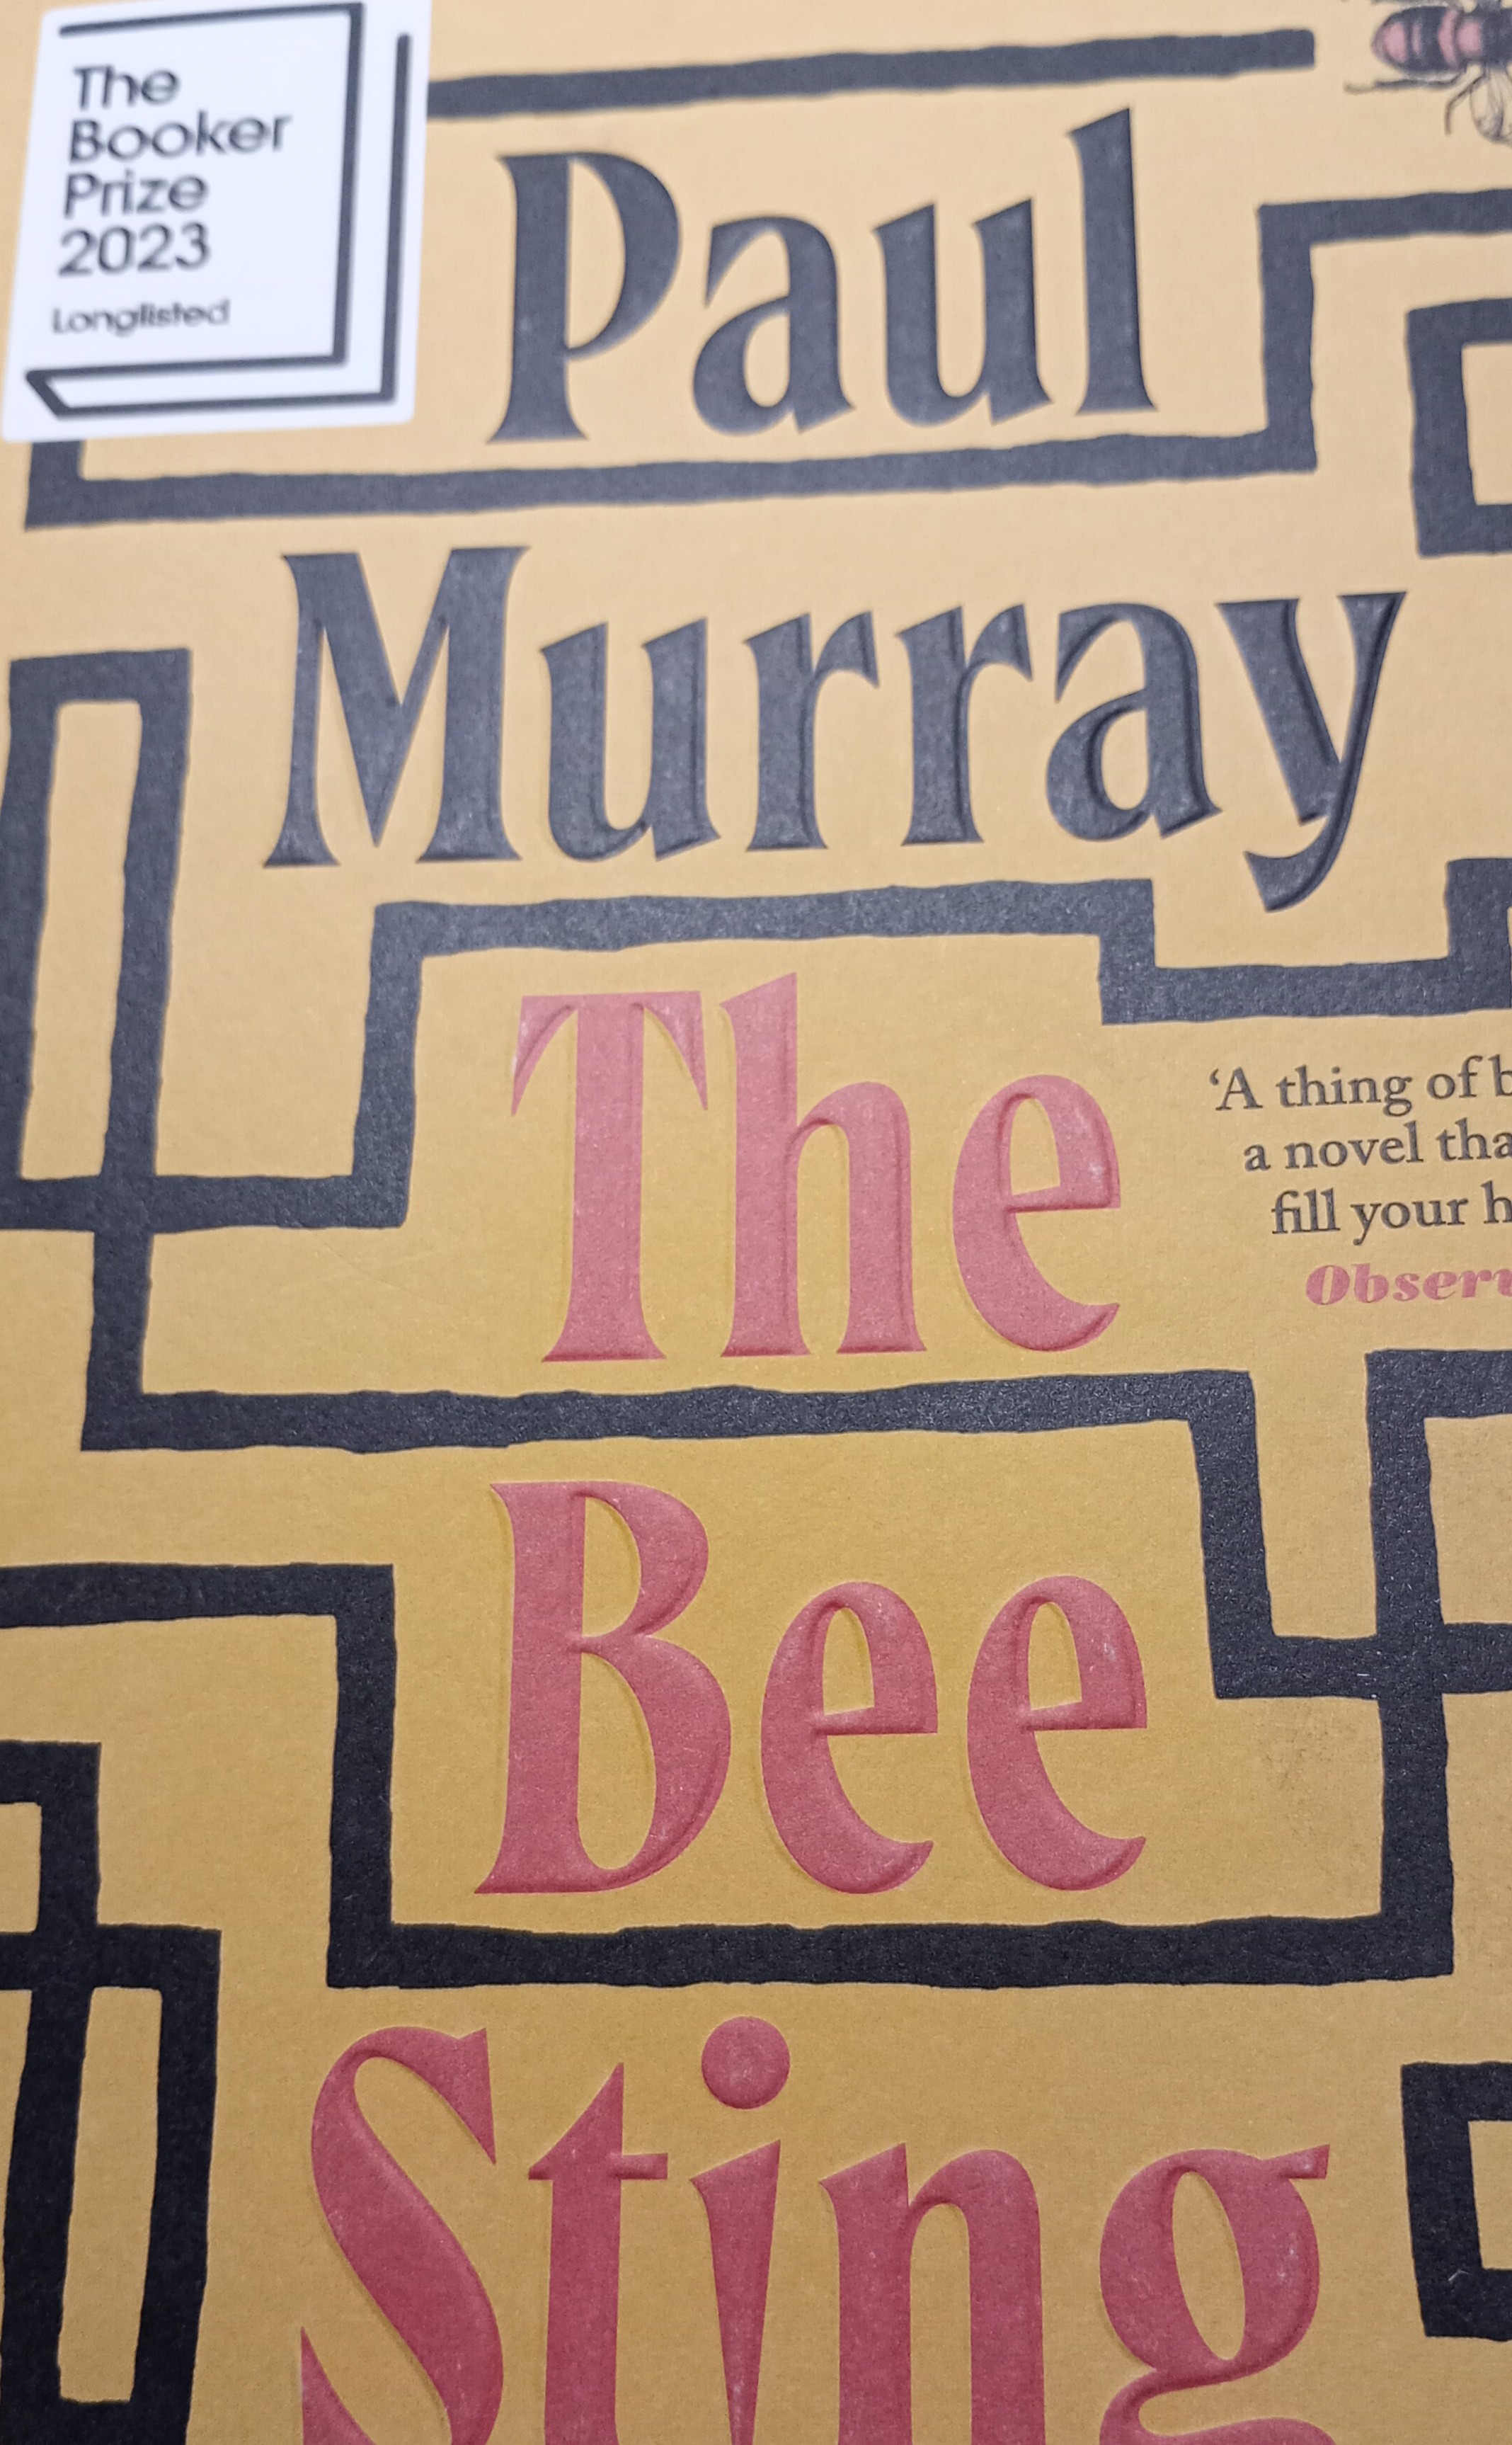 Paul Murray: The Bee Sting (Paperback, 2023, Penguin Books, Limited)